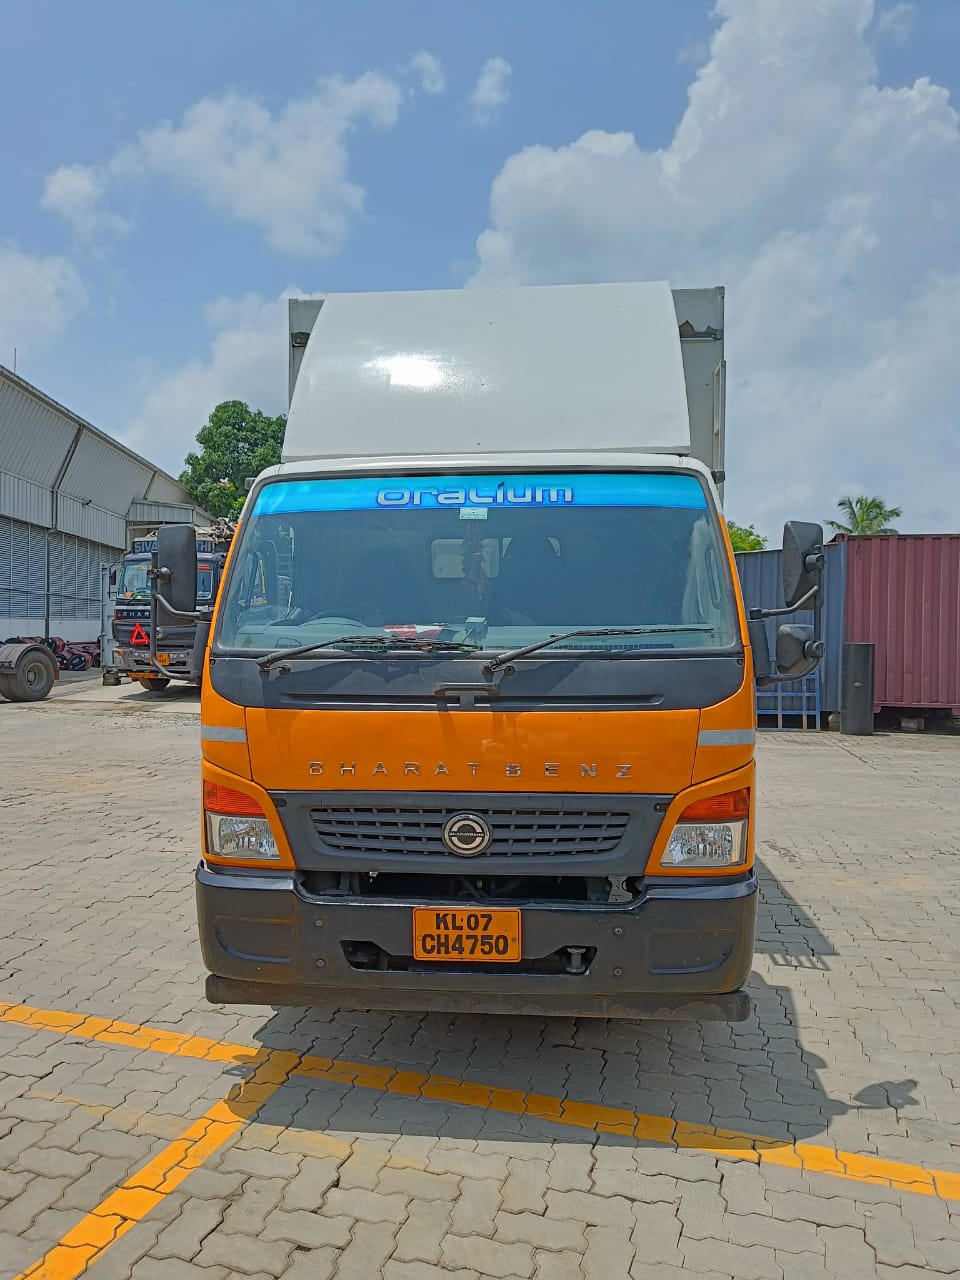 Used Bharatbenz Sale in Kerala